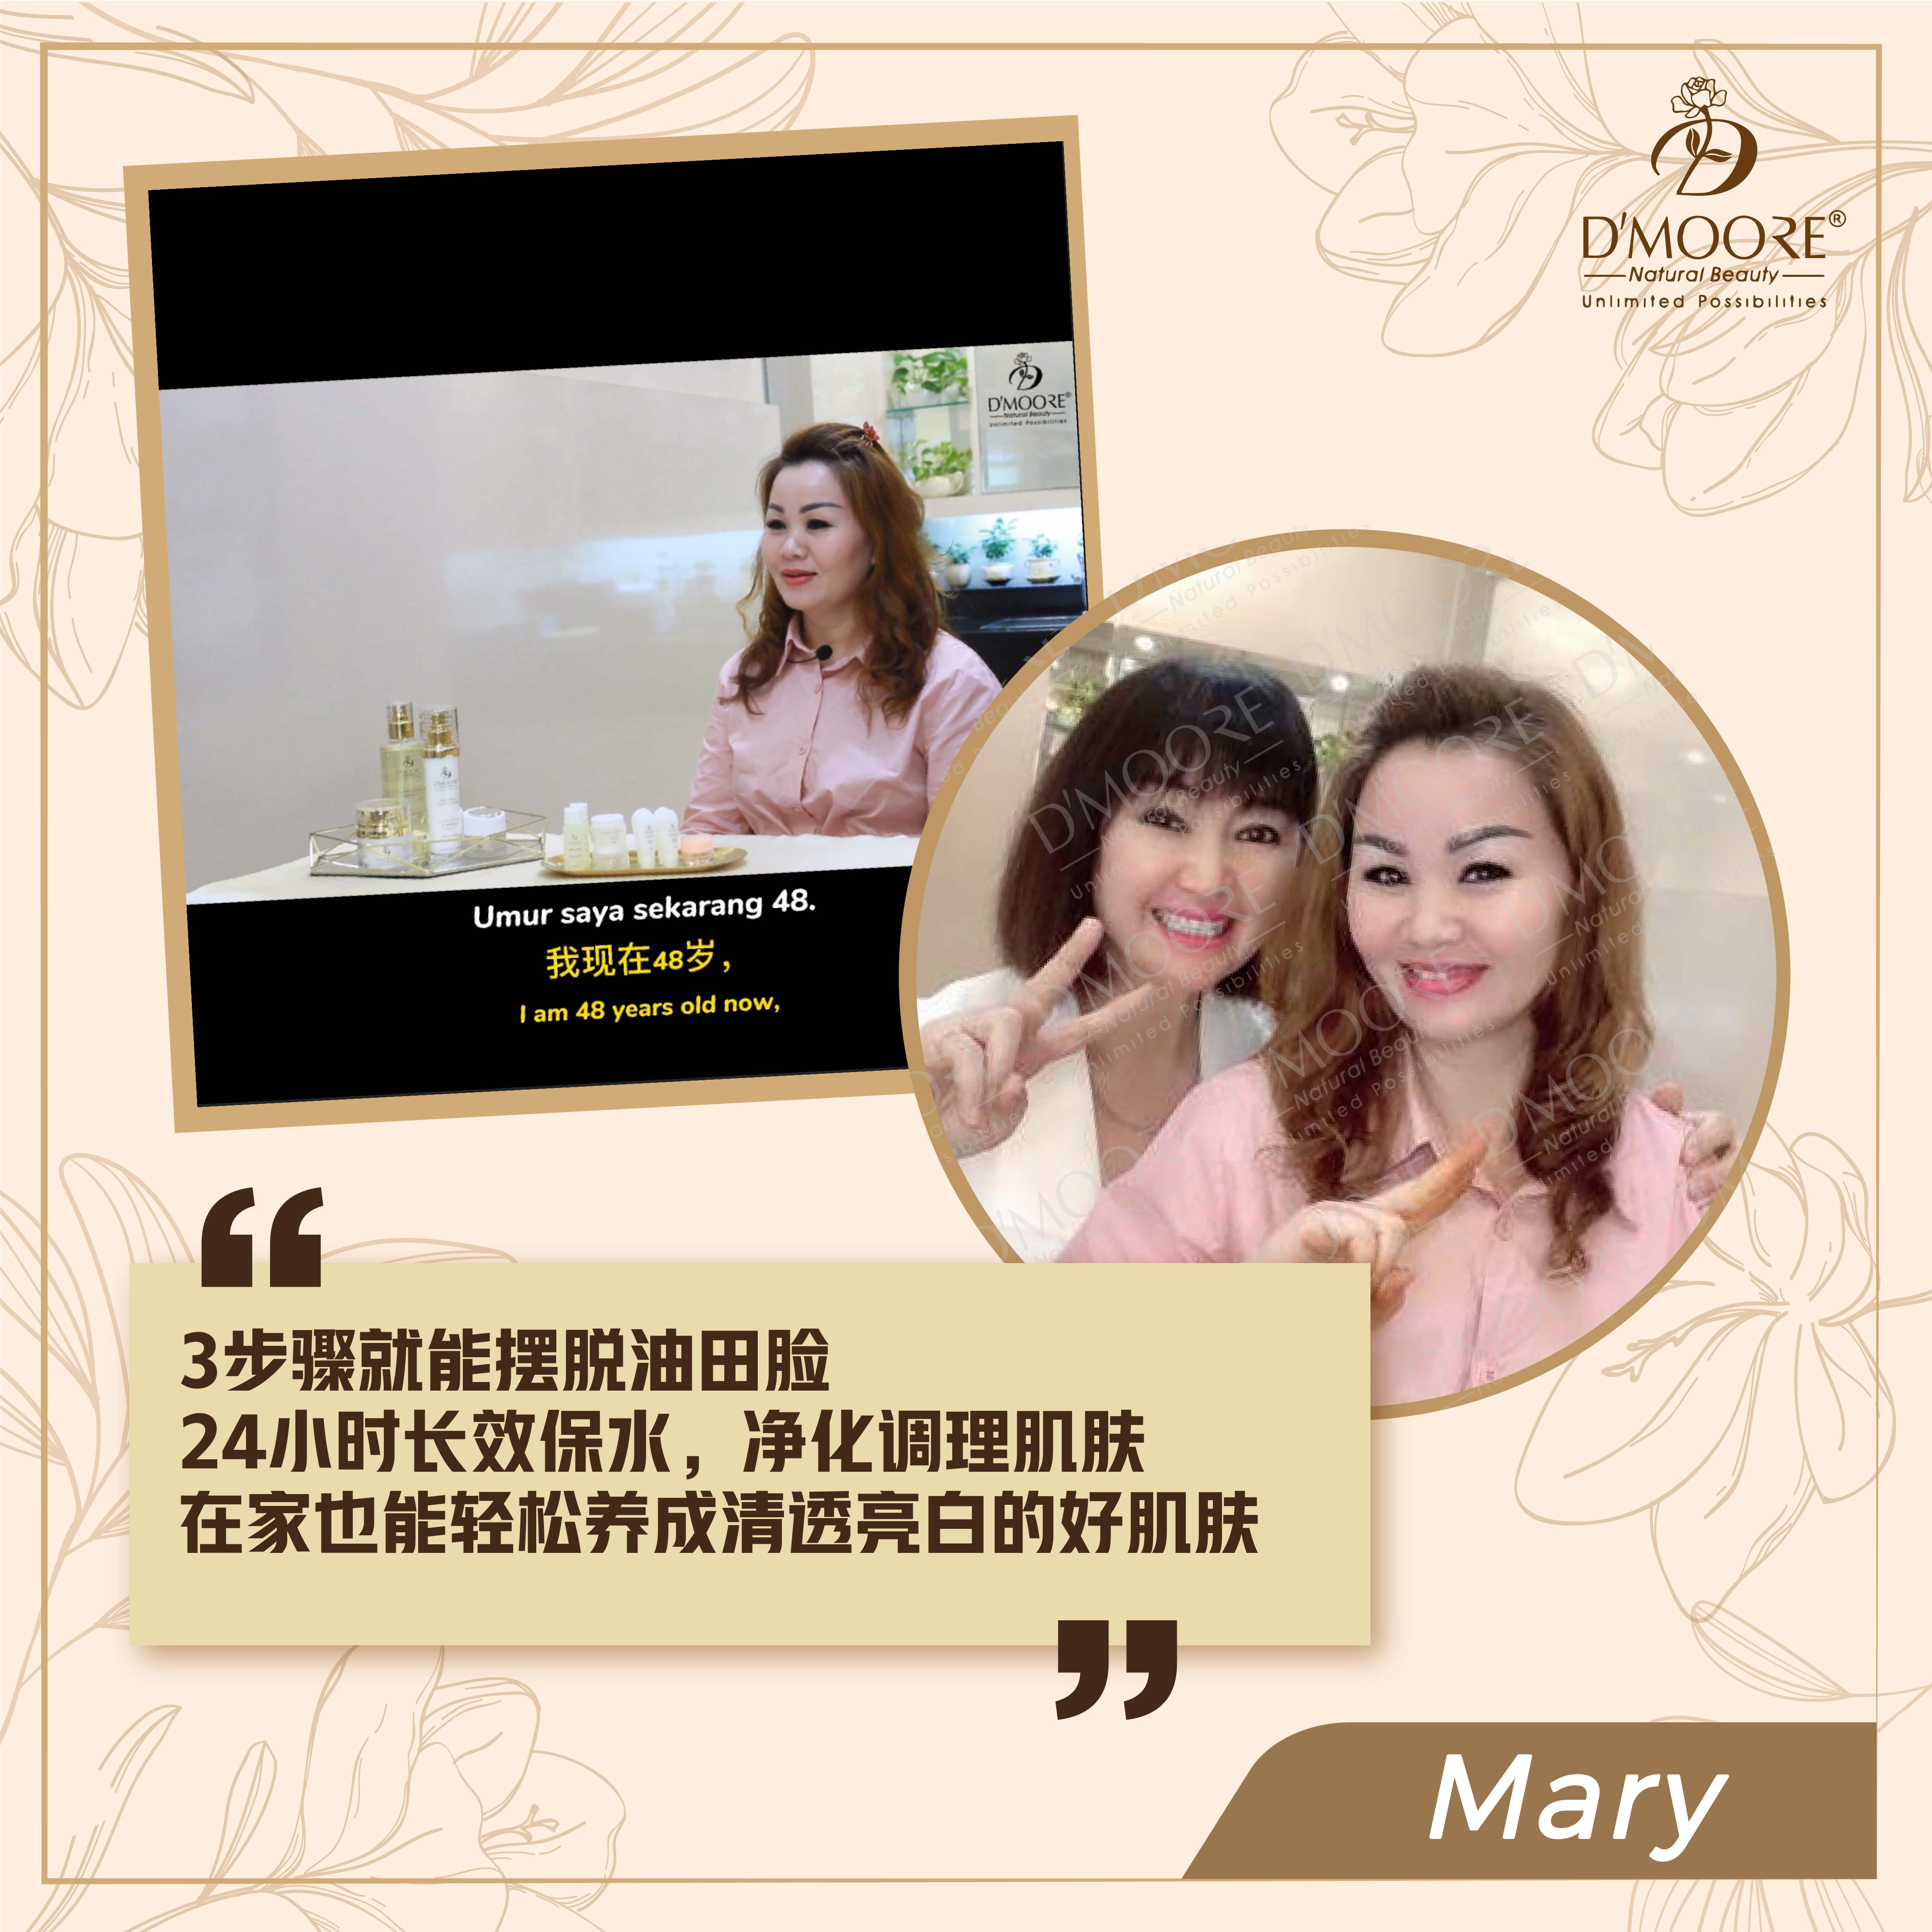 D'MOORE Official Site | The Spotless Skin of Confidence - Mary (Sarawak)